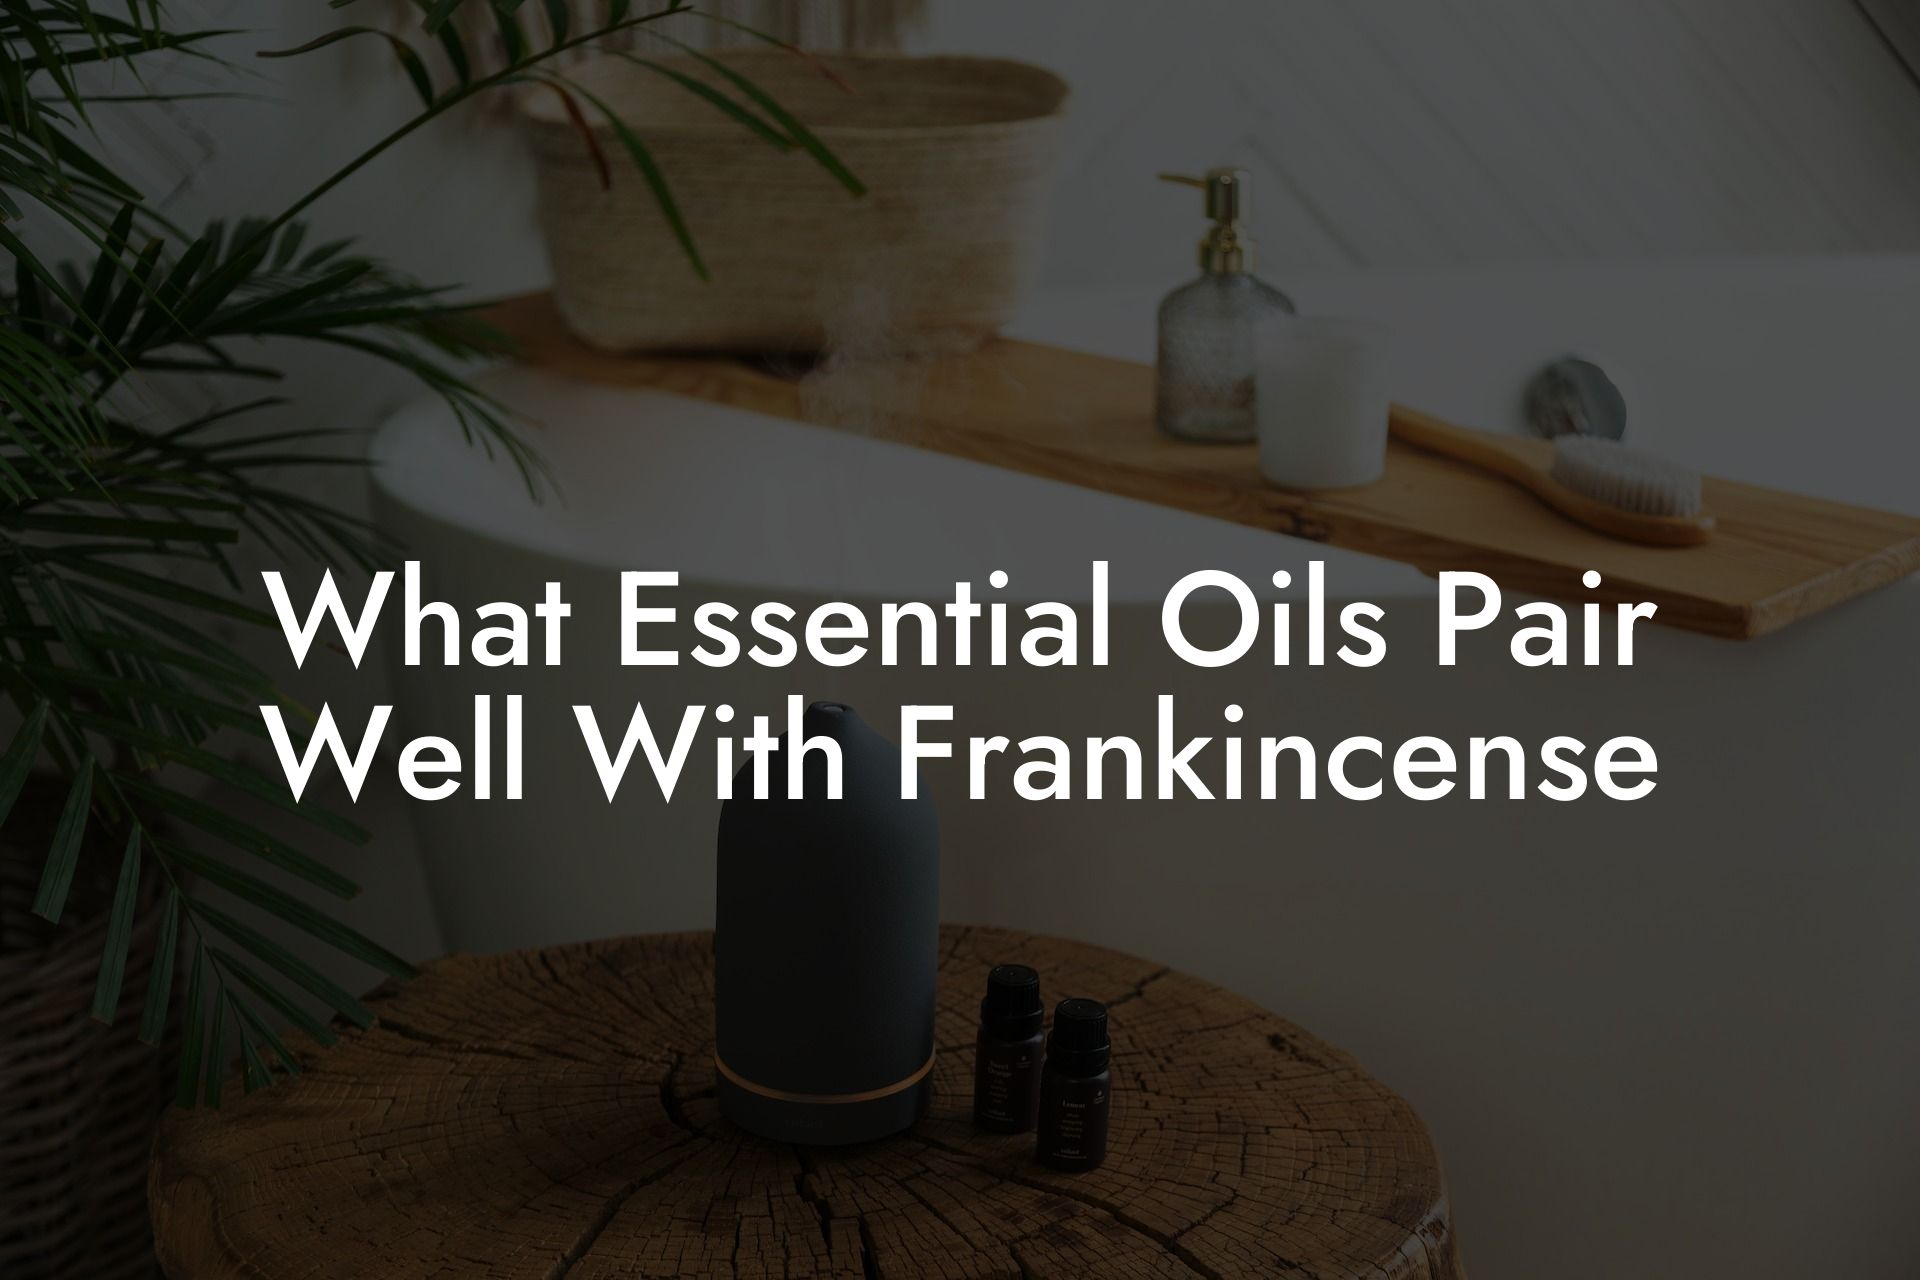 What Essential Oils Pair Well With Frankincense